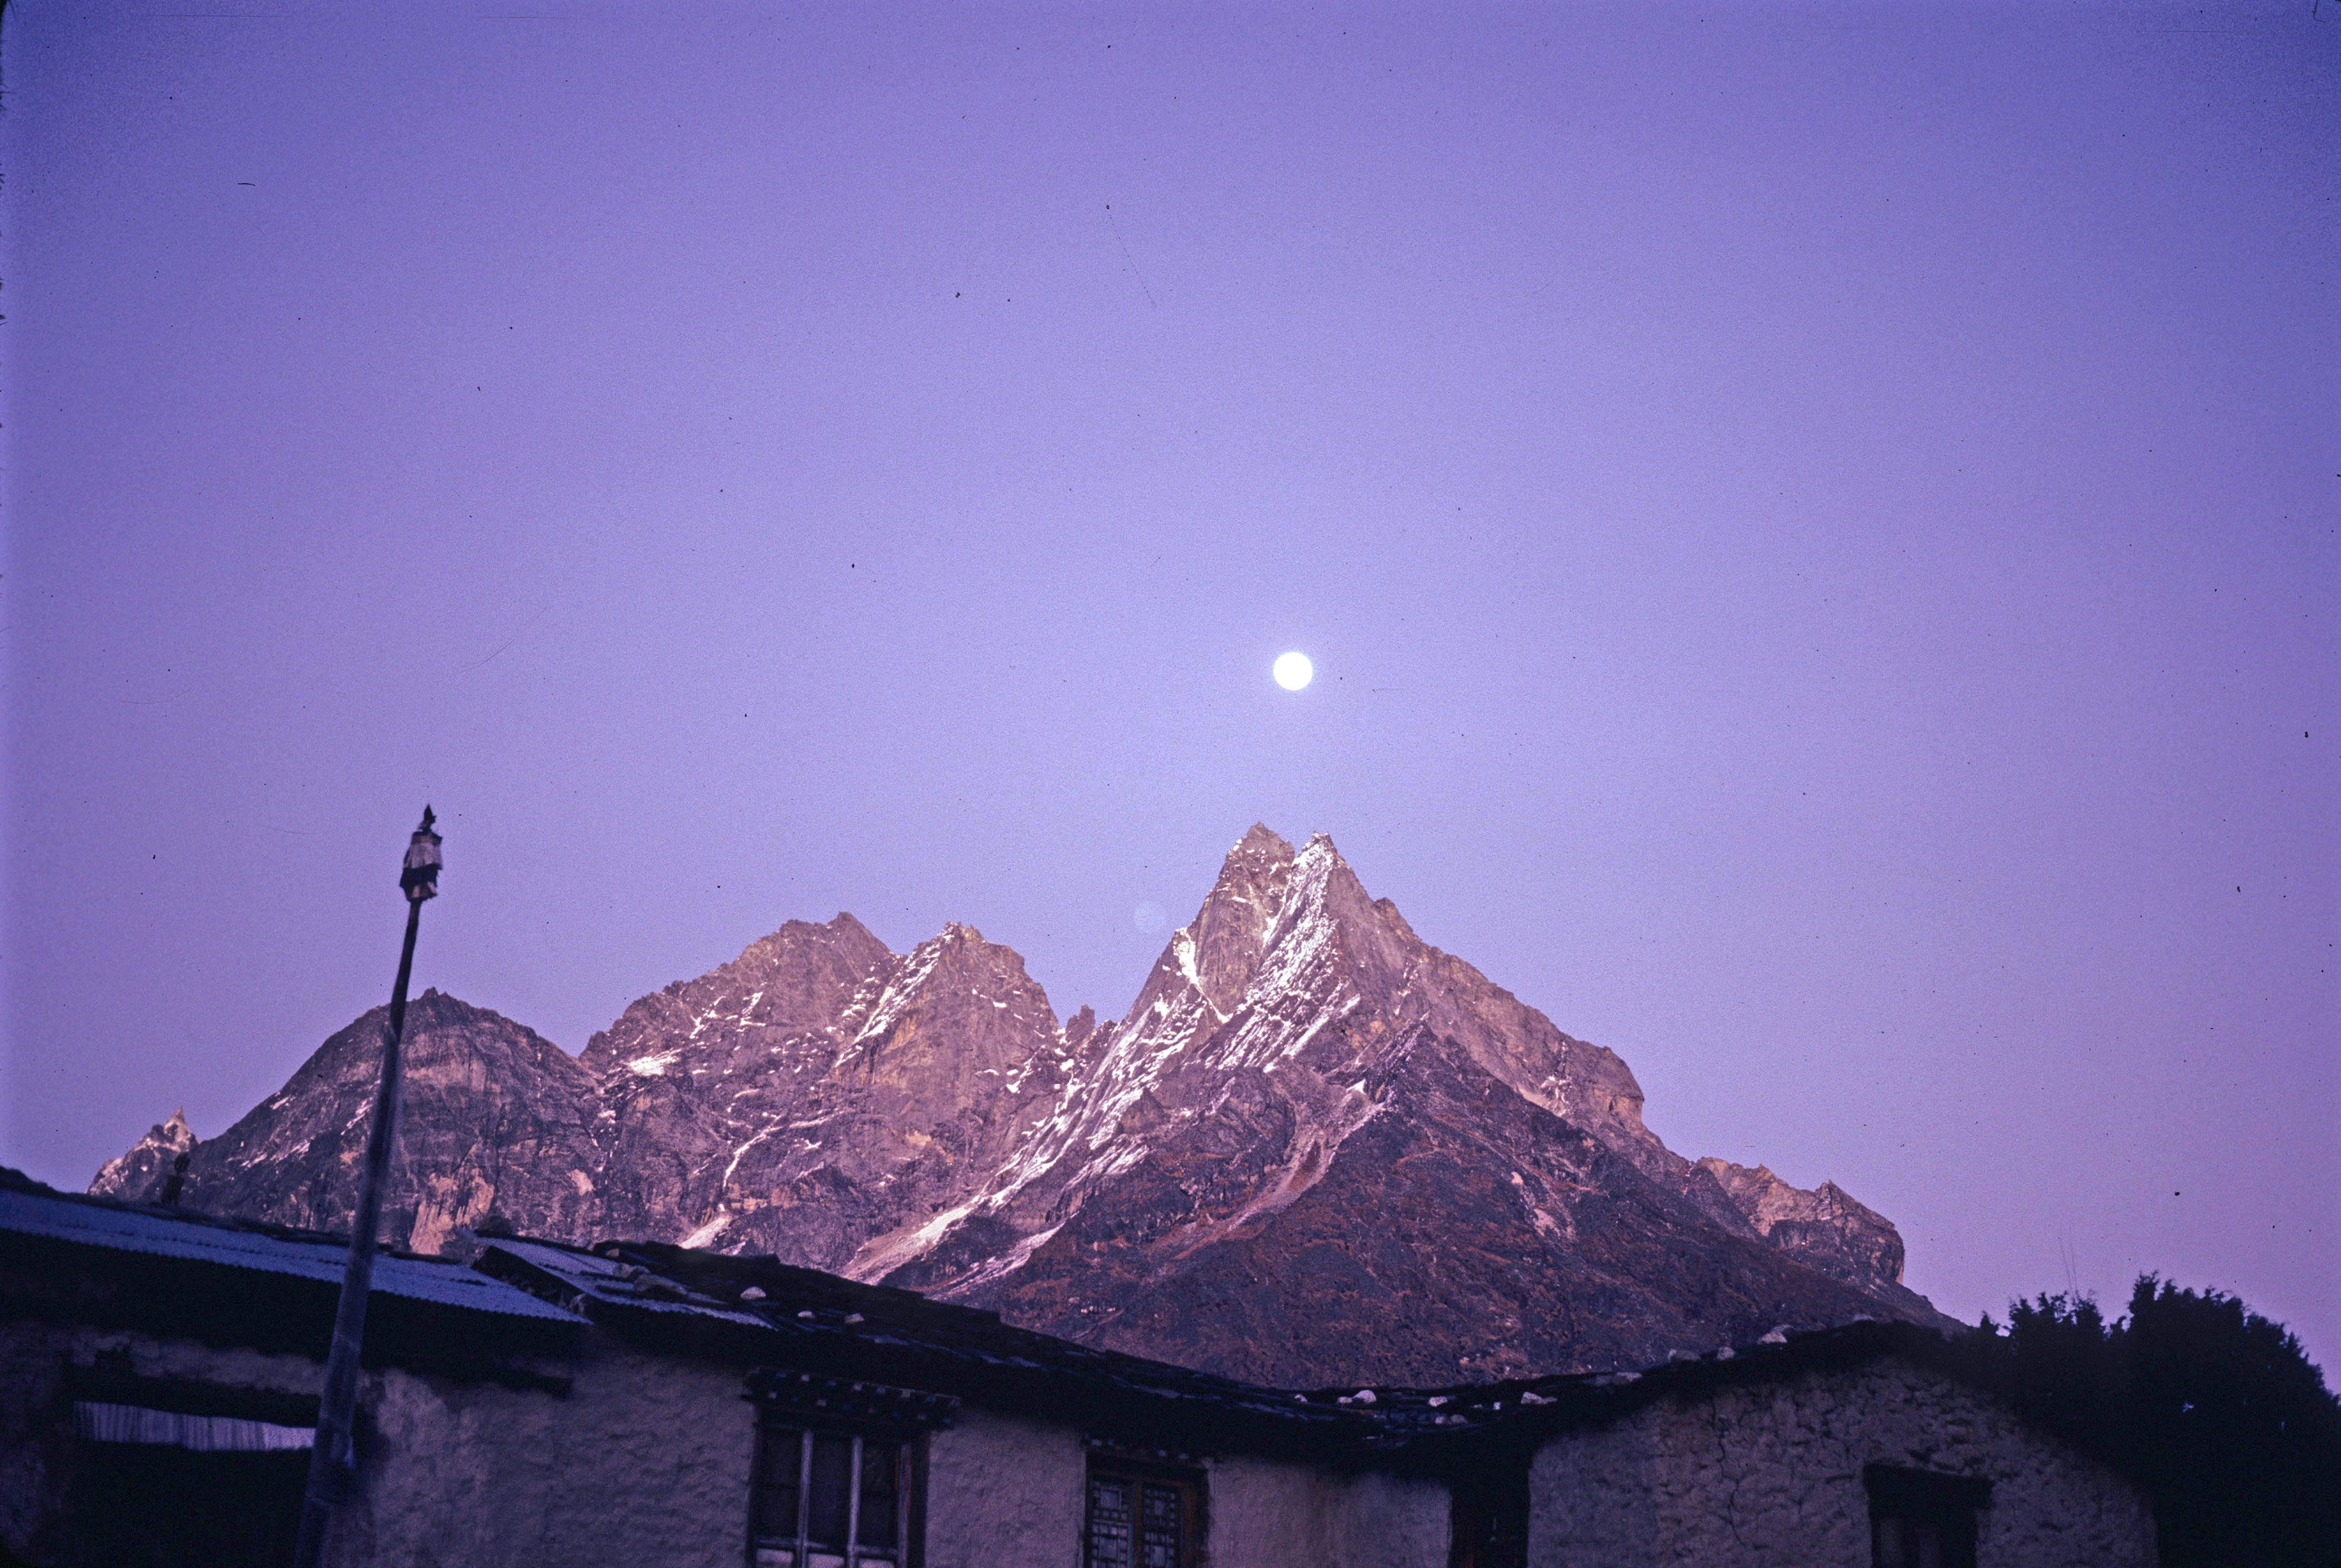 Guesthouse under Moonlight at Thyangboche